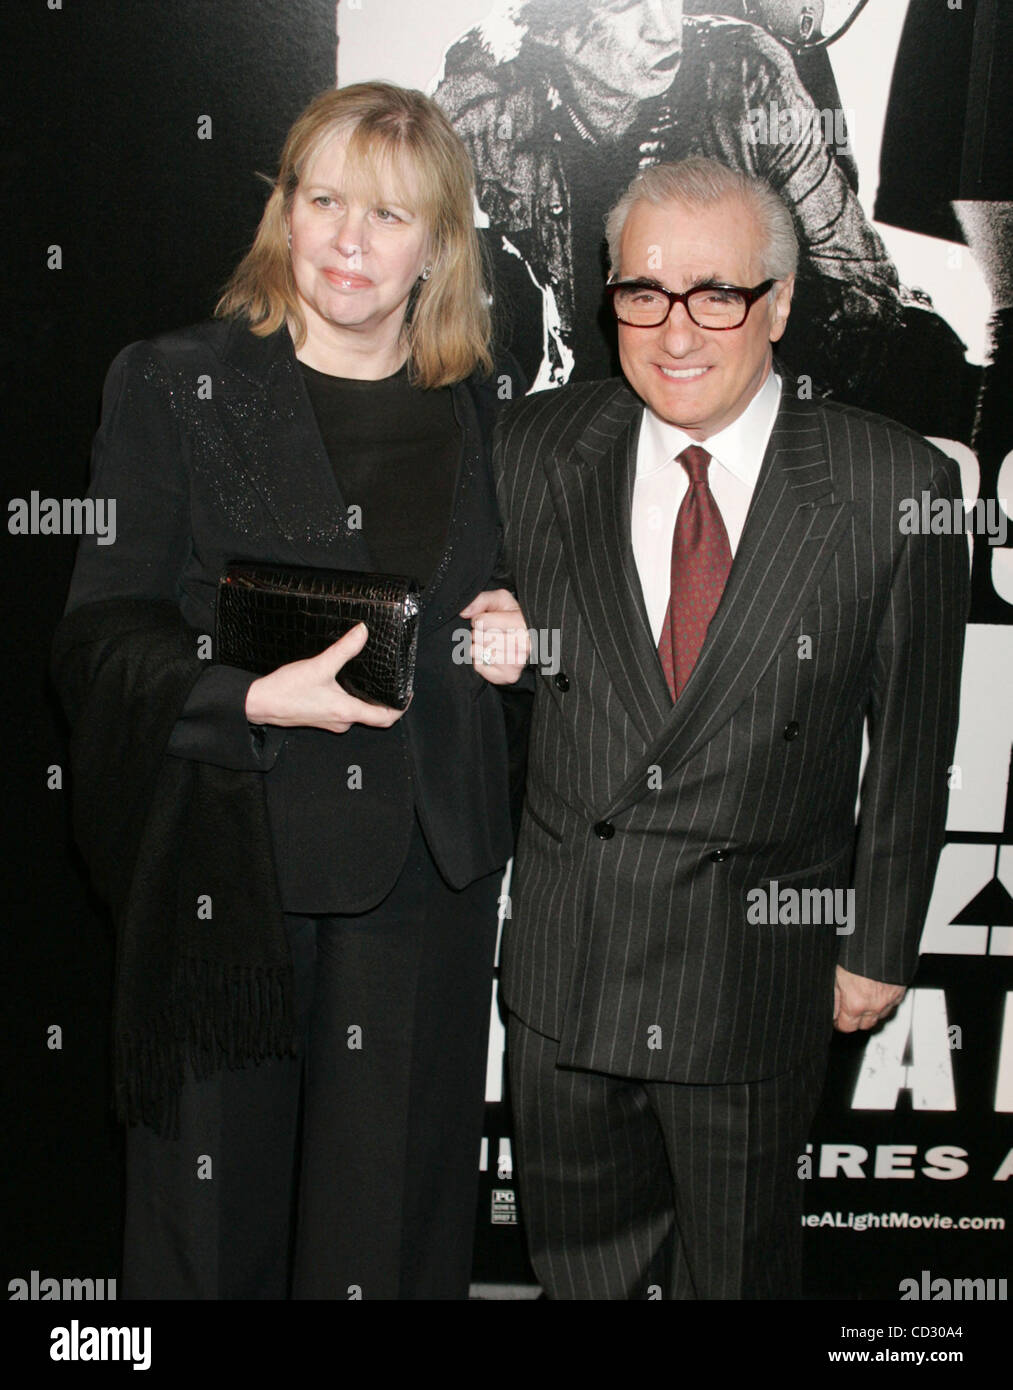 Mar 30, 2008 - New York, NY, USA - Director MARTIN SCORSESE and wife HELEN MORRIS at the arrivals for the New York premiere of 'Shine A Light' held at the Ziegfeld Theater. (Credit Image: © Nancy Kaszerman/ZUMA Press) Stock Photo